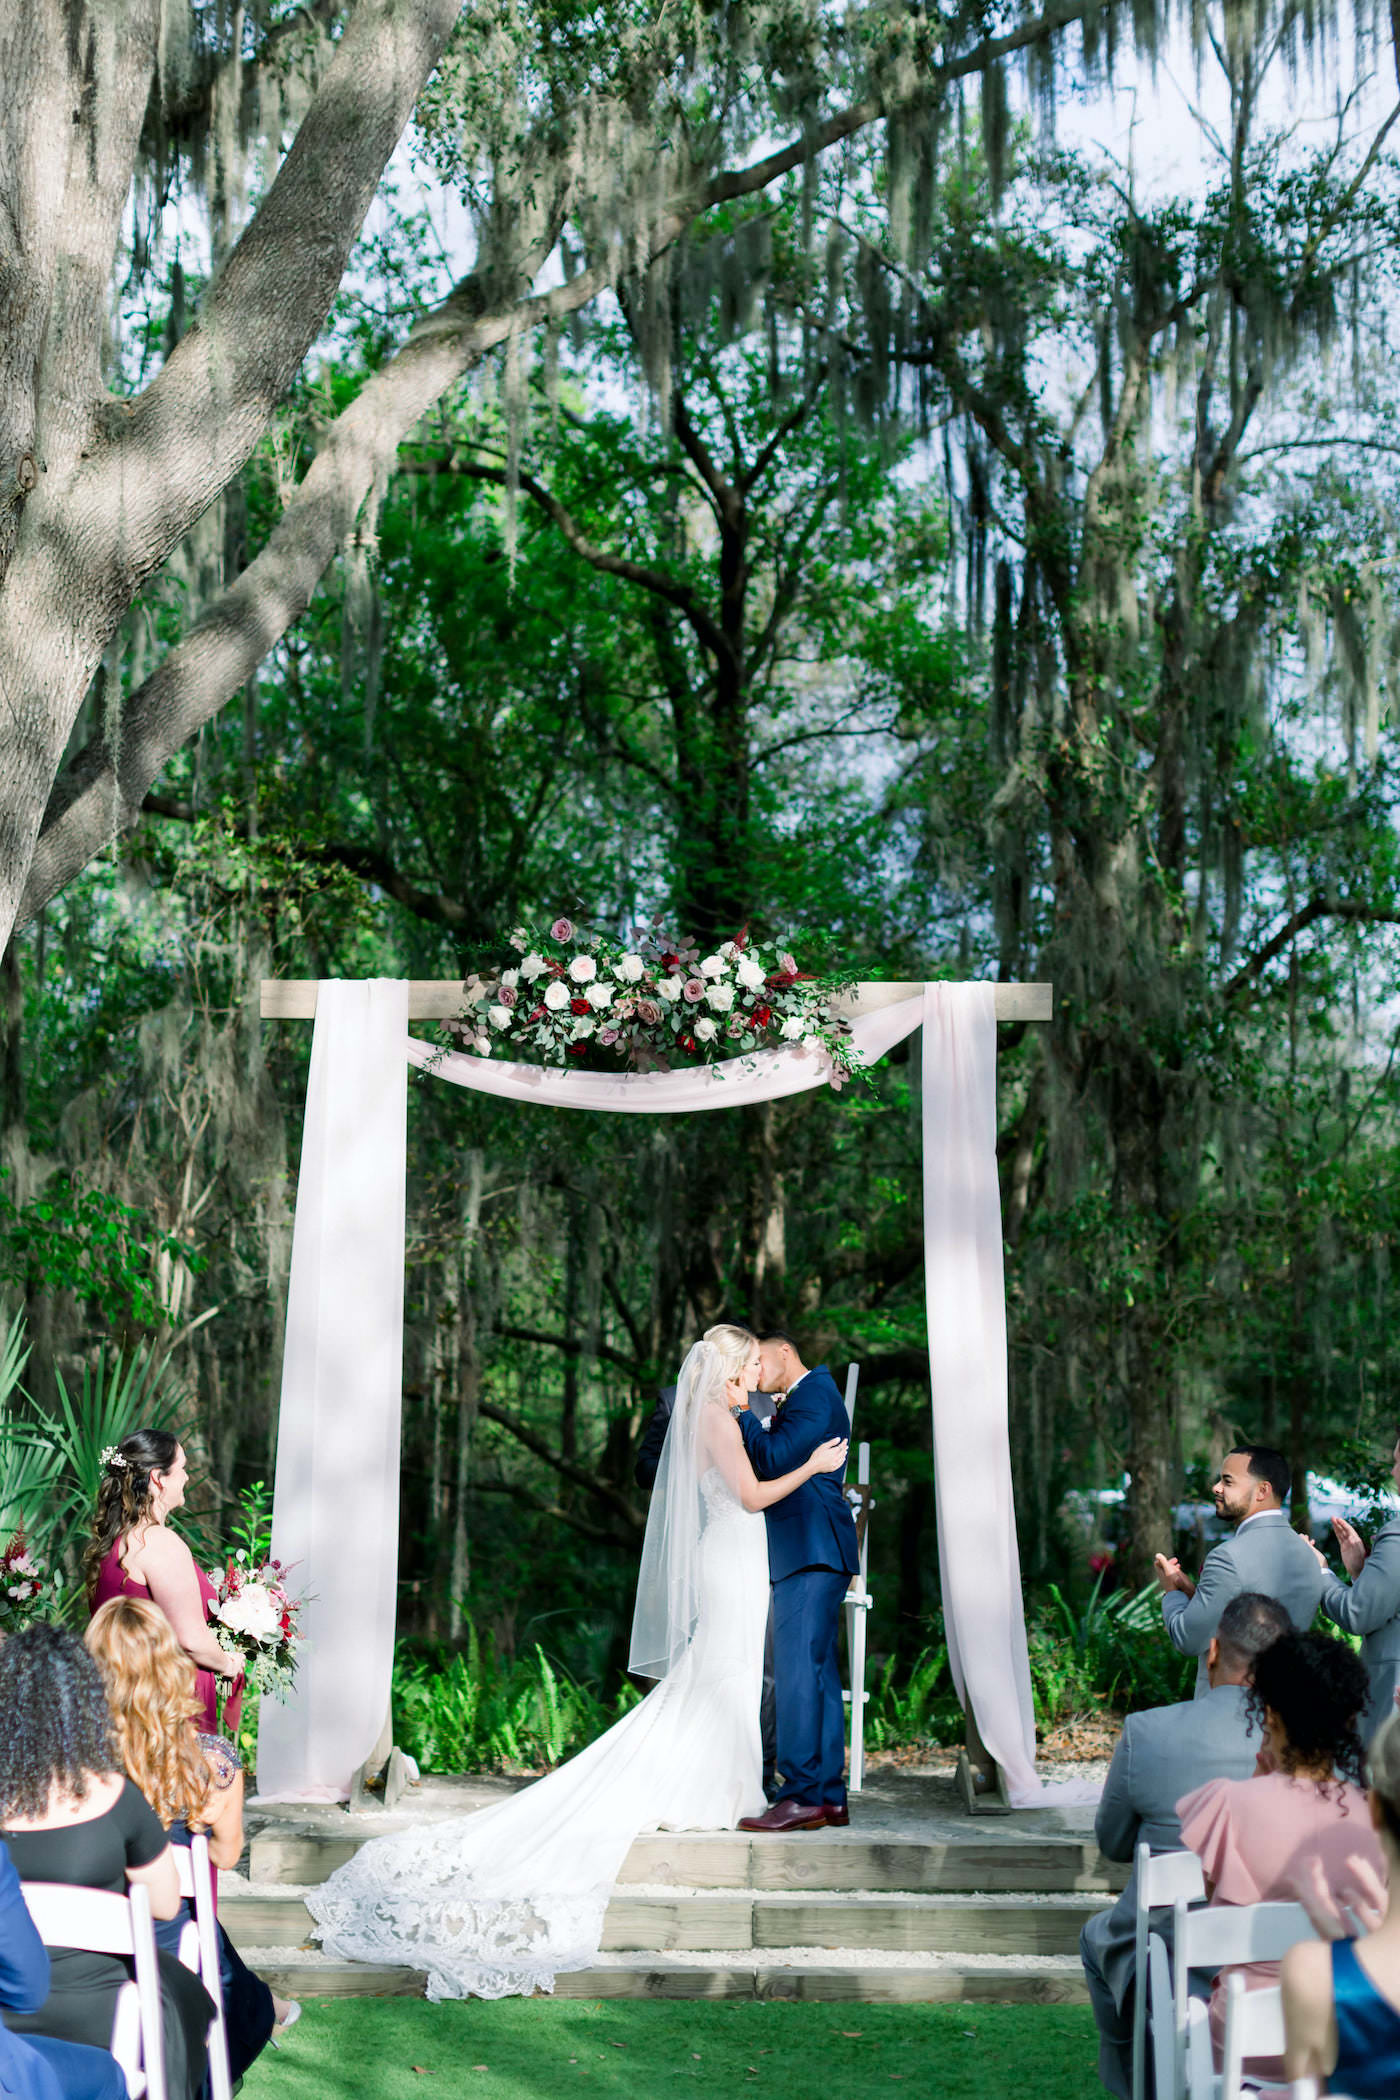 Bride and Groom First Kiss | Outdoor Florida Wedding Ceremony with Draped Arch and Burgundy and White Floral Spray Arrangement